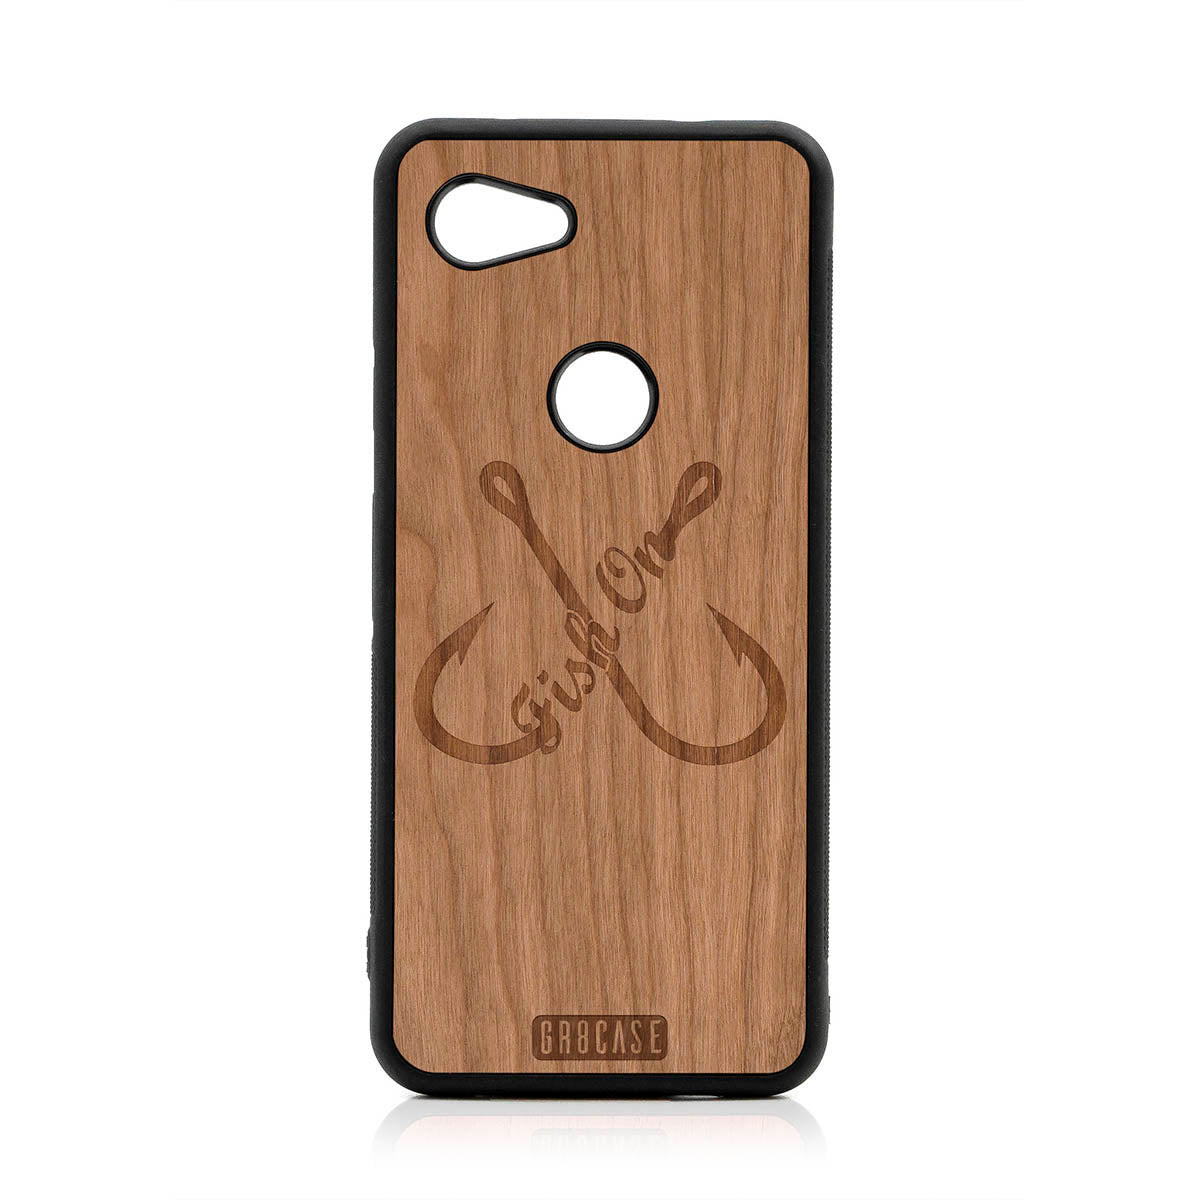 Fish On (Fish Hooks) Design Wood Case For Google Pixel 3A XL by GR8CASE